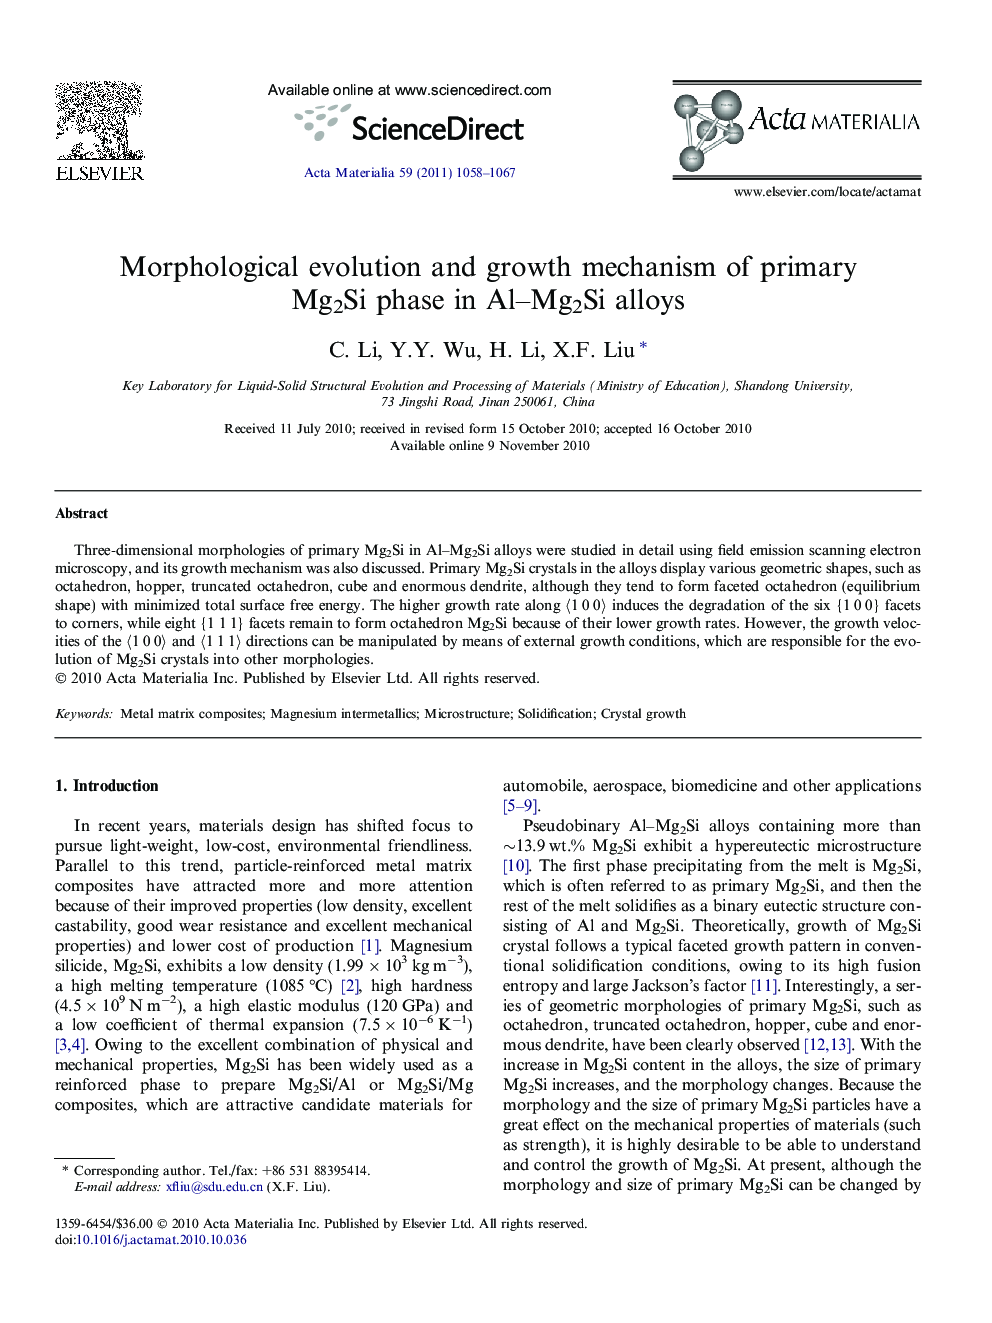 Morphological evolution and growth mechanism of primary Mg2Si phase in Al–Mg2Si alloys